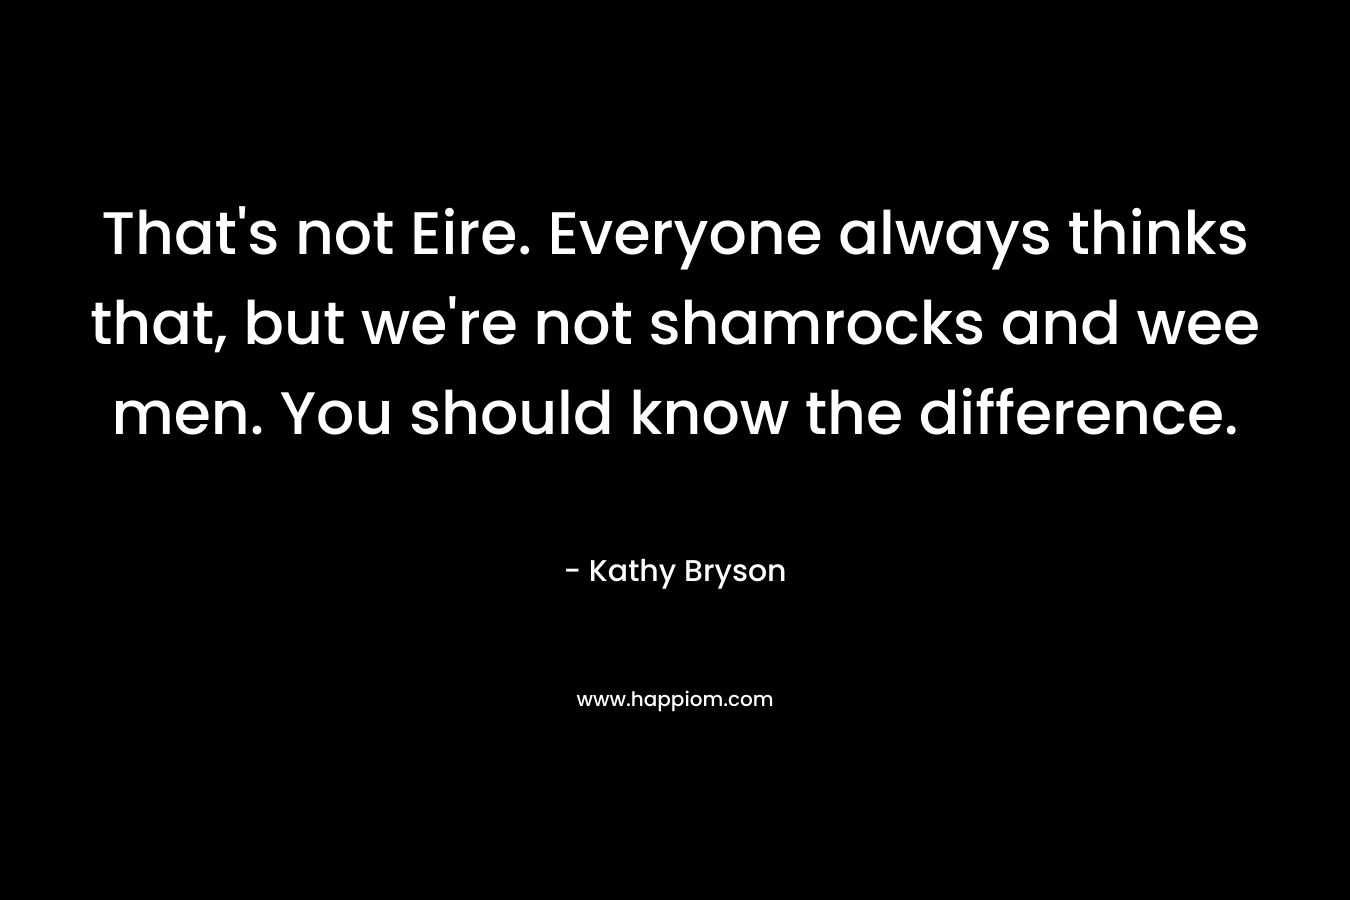 That's not Eire. Everyone always thinks that, but we're not shamrocks and wee men. You should know the difference.